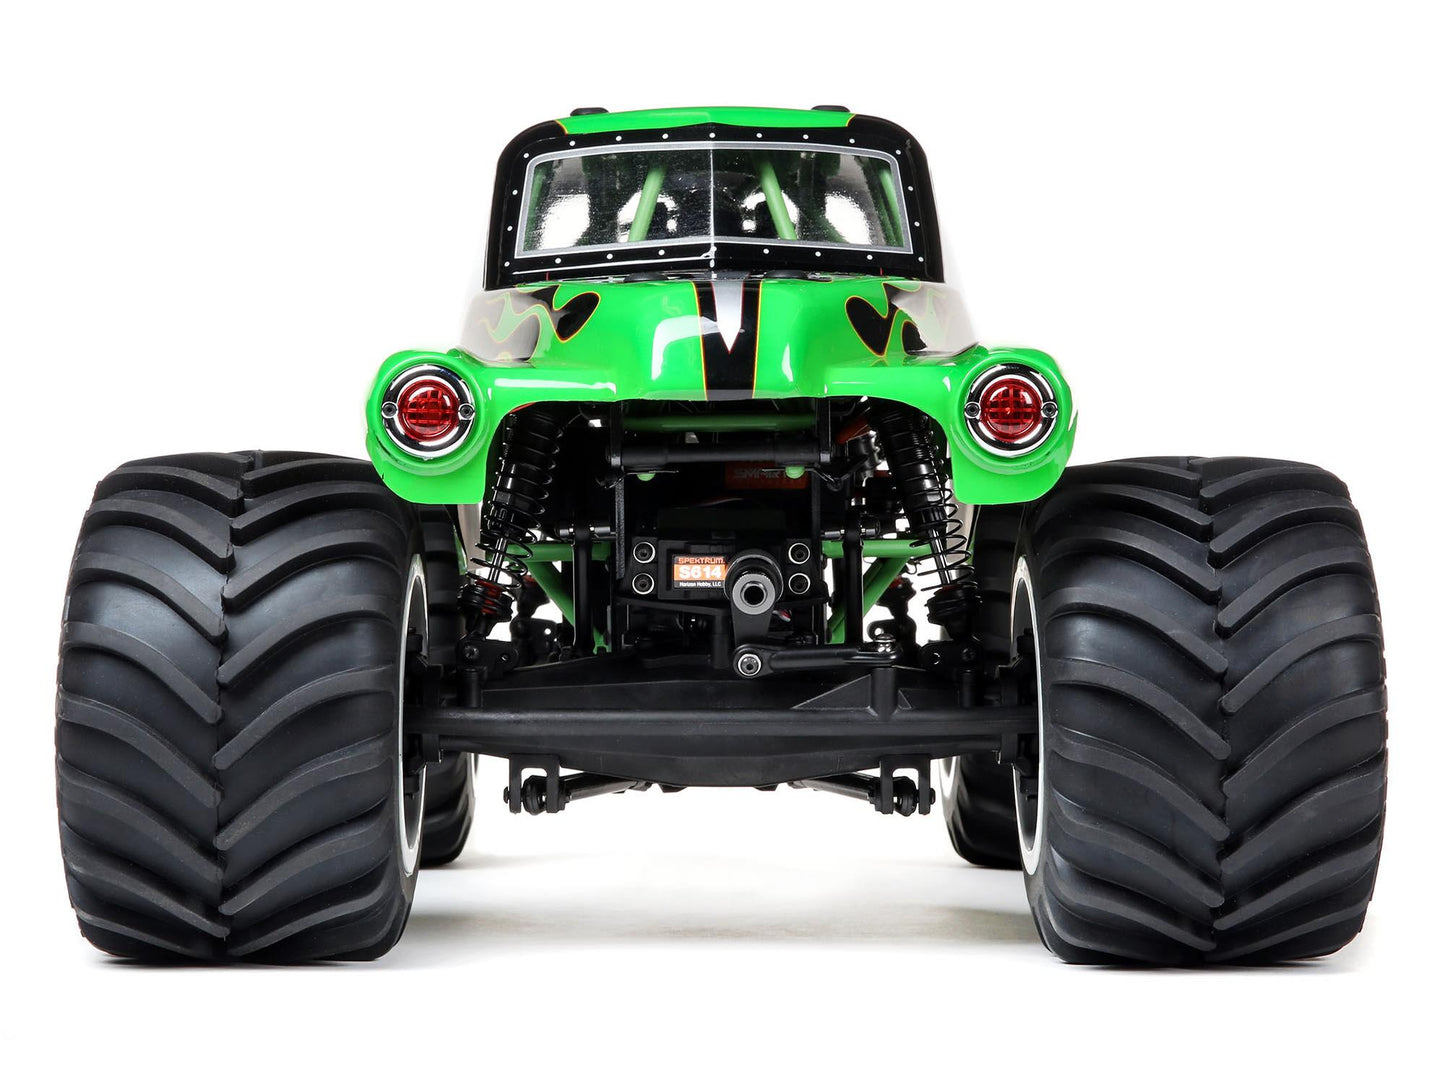 Losi LMT 4WD Solid Axle Monster Truck RTR - Grave Digger LOS04021T1